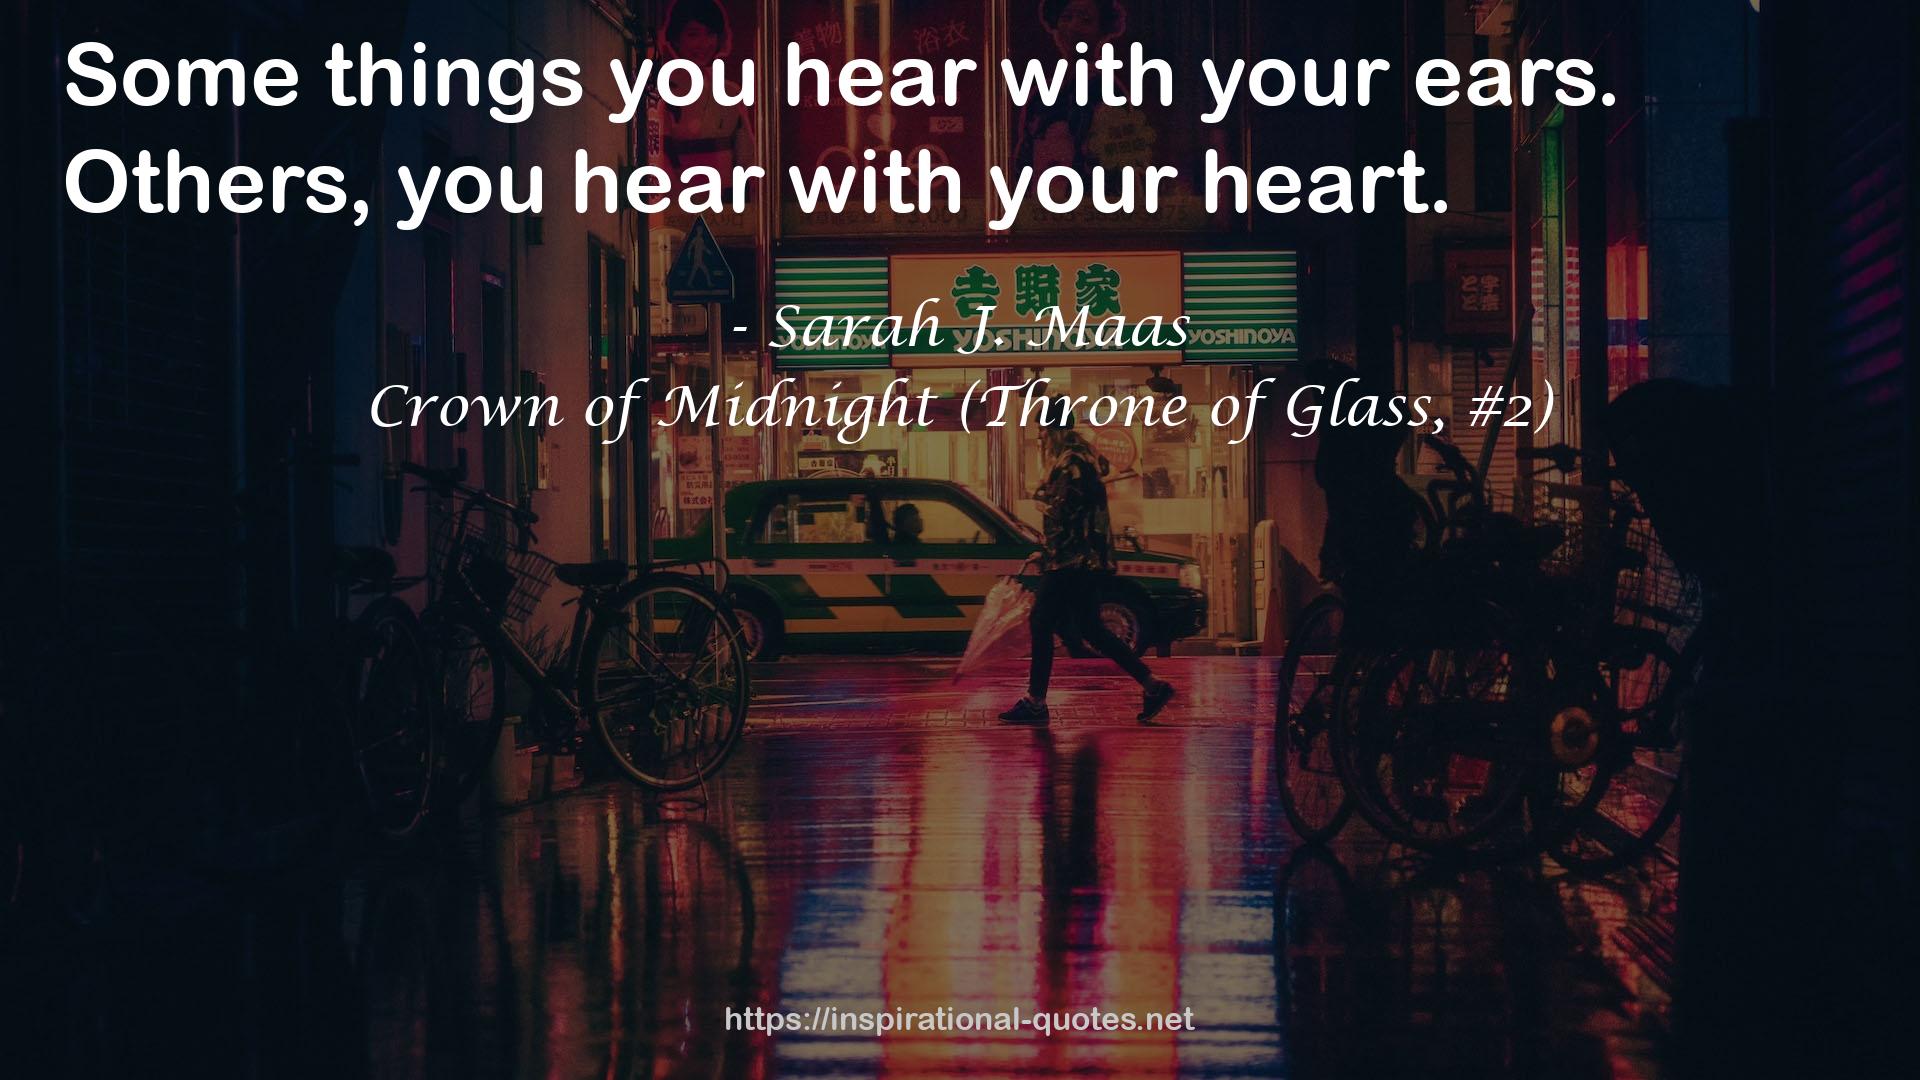 Crown of Midnight (Throne of Glass, #2) QUOTES